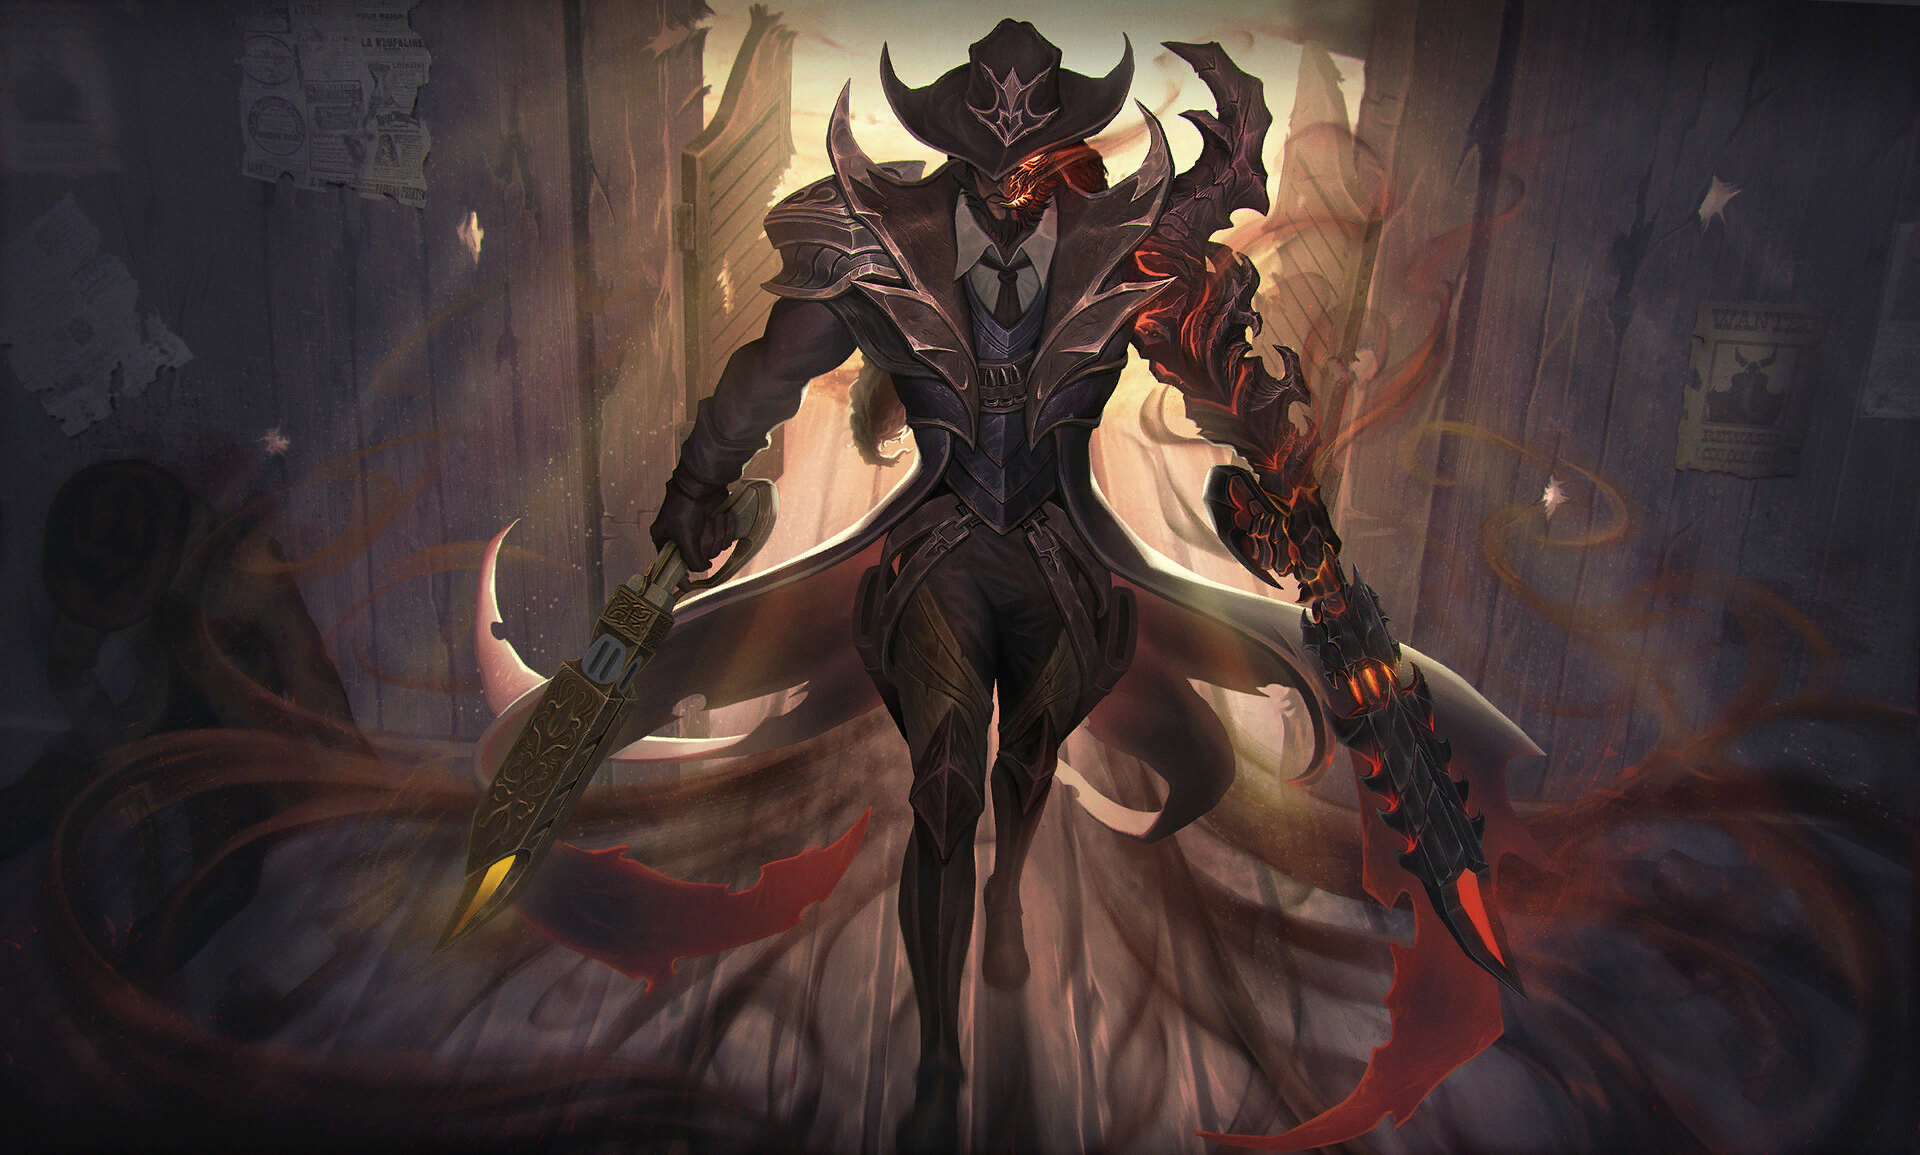 Everyone will die, but someone has to help - League of legends, Lucian, Art, Games, Cowboys